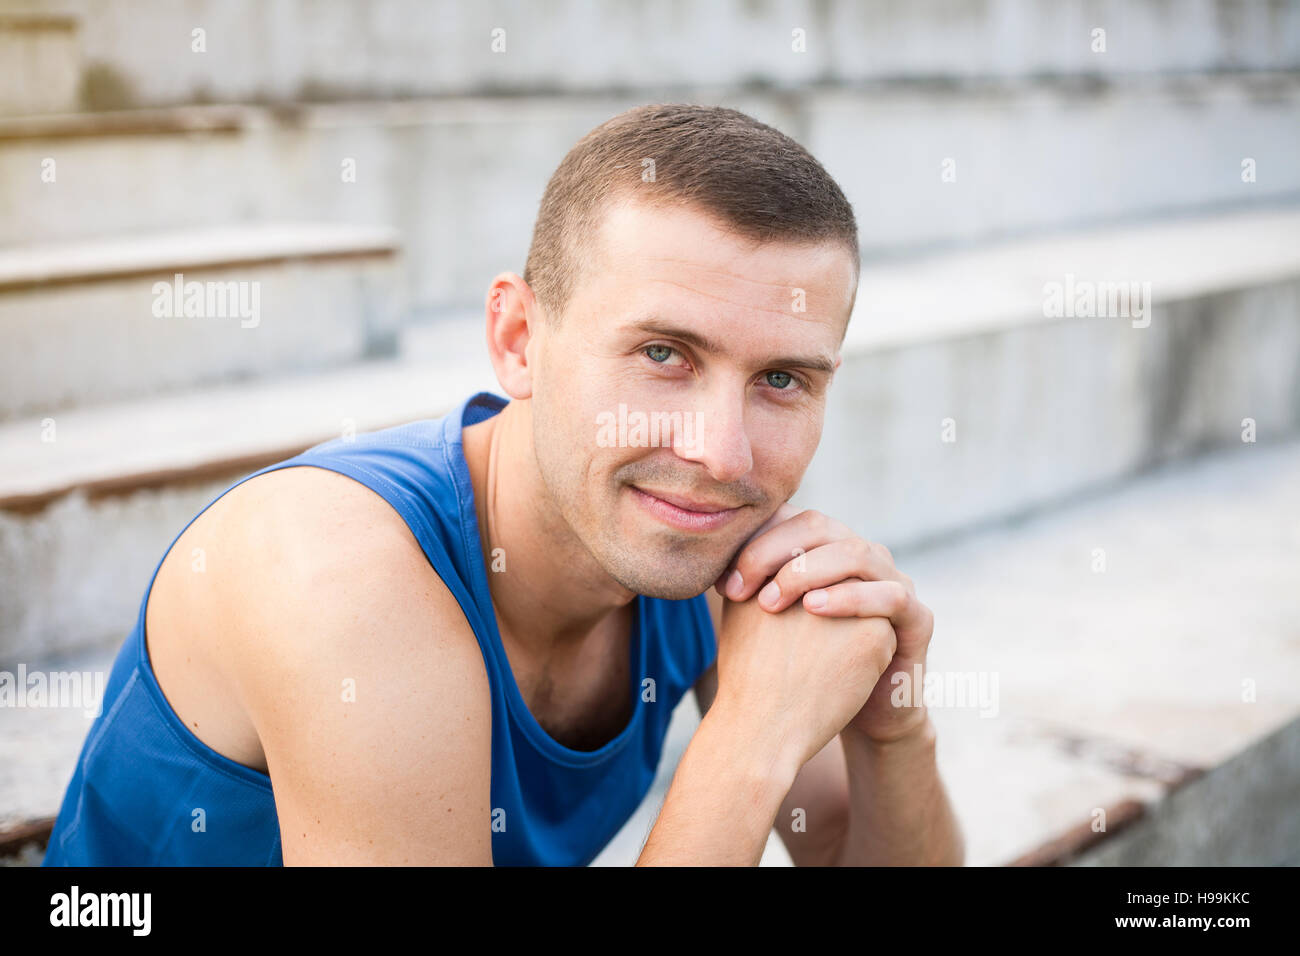 Portrait of a young man in a blue shirt closeup. Stock Photo